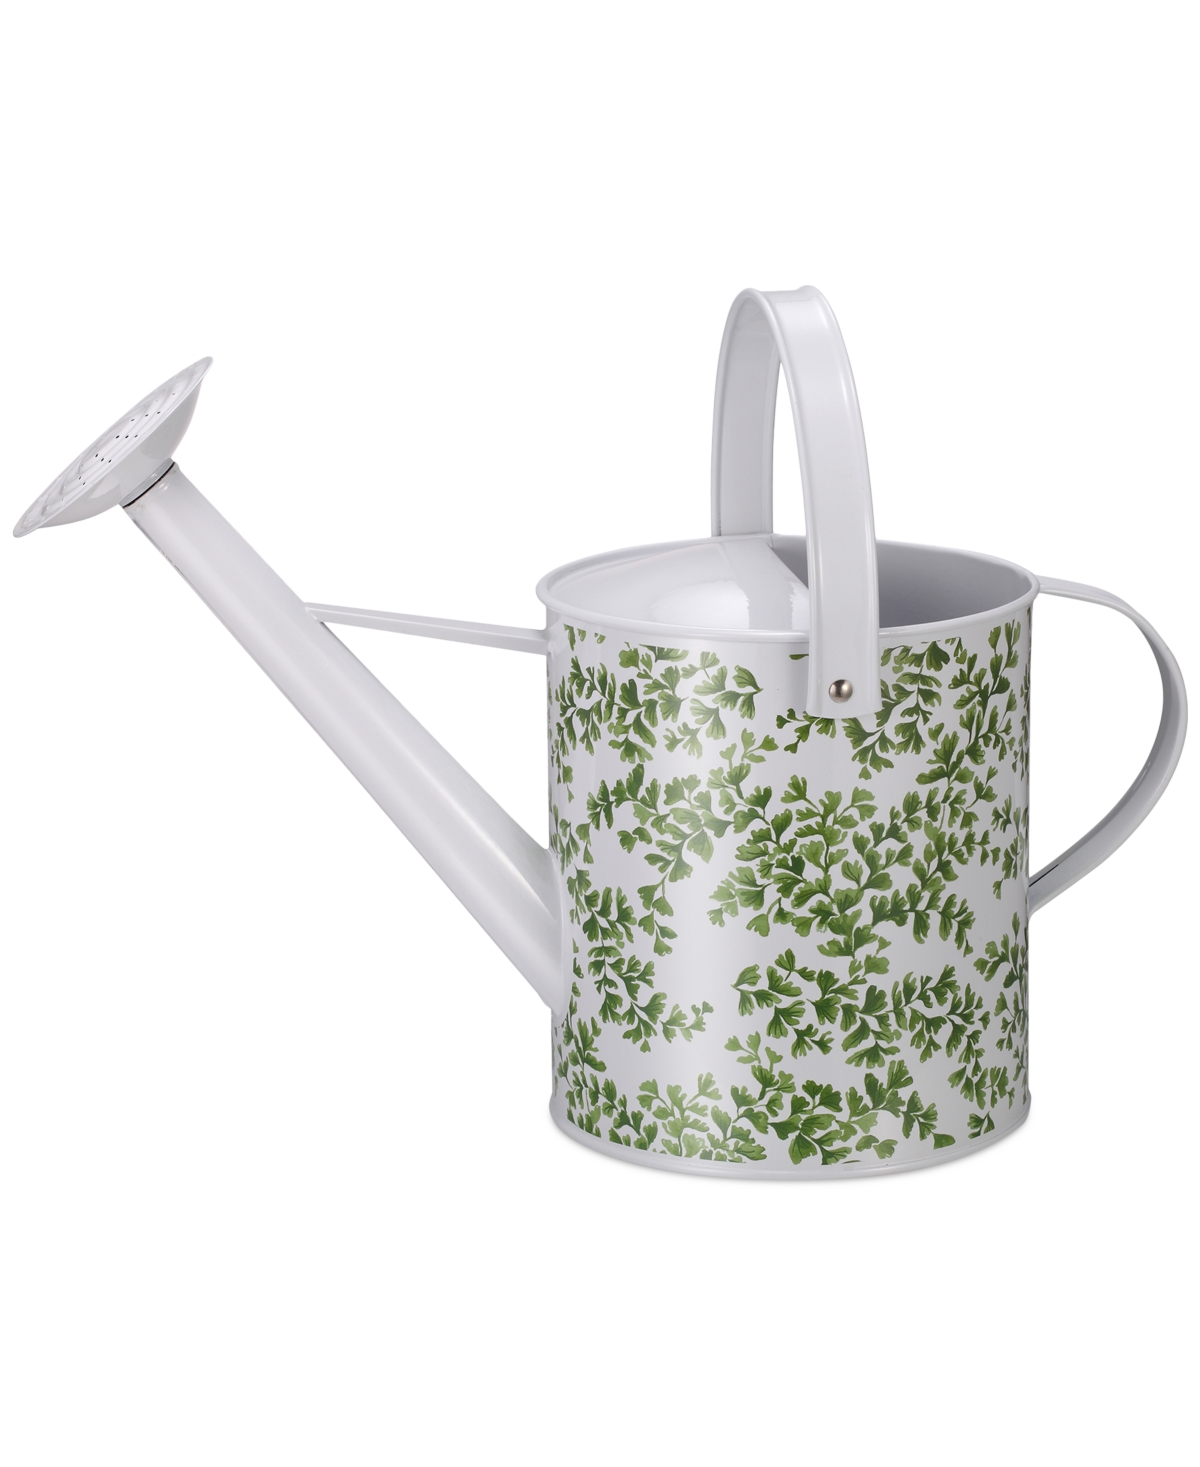 Flower Show Watering Can, Created for Macy's - White Leaf